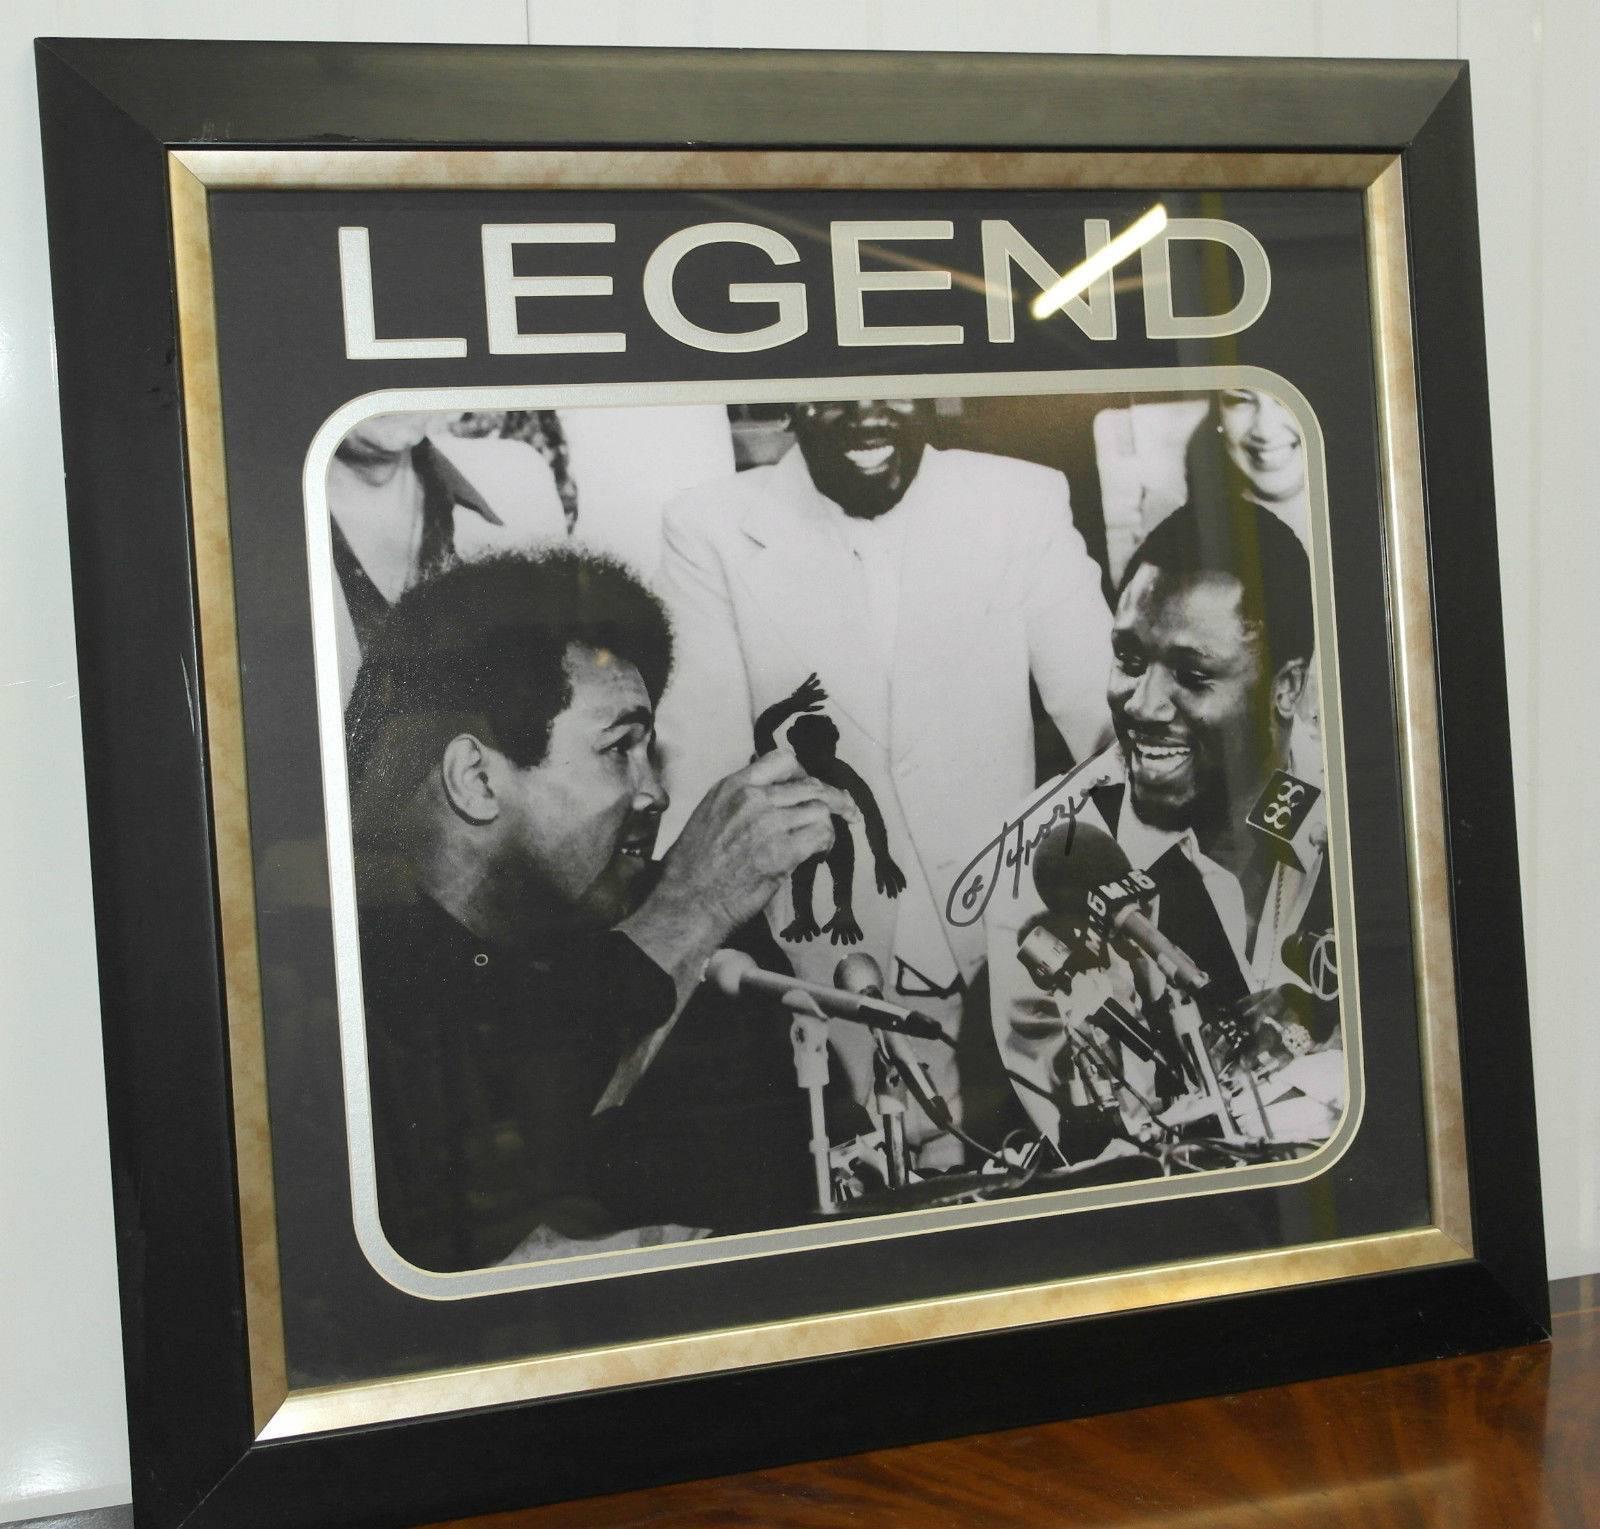 We are delighted to offer for sale this stunning and really quite rare original signed Joe Frazier with Muhammed Ali “Legend” print

The signature is original, signed well in black marker

A black and white photograph featuring Muhammad Ali and